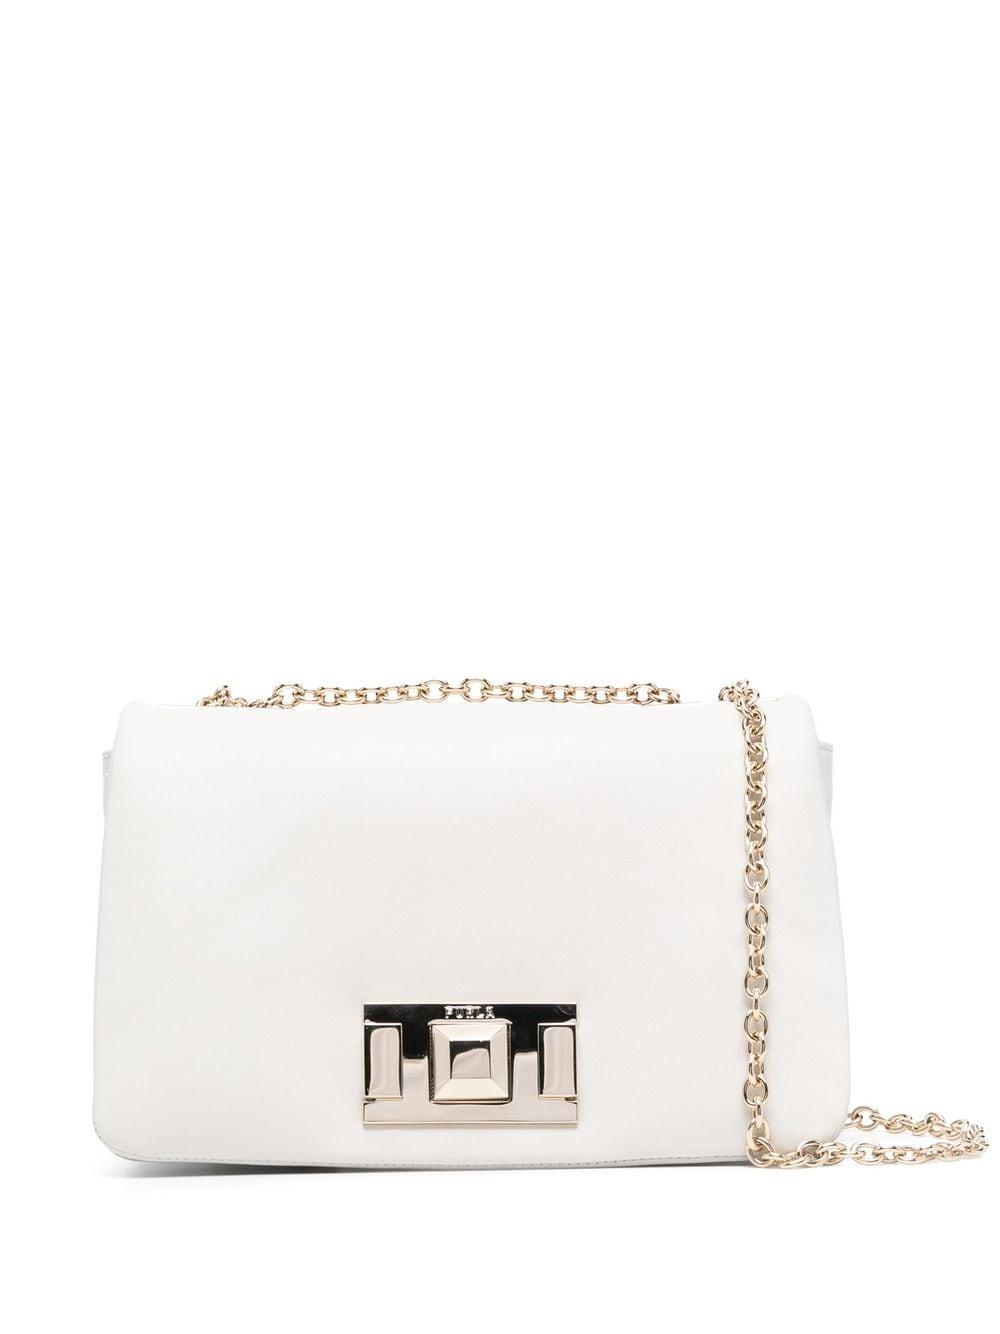 Furla Chain-link Leather Bag in White | Lyst